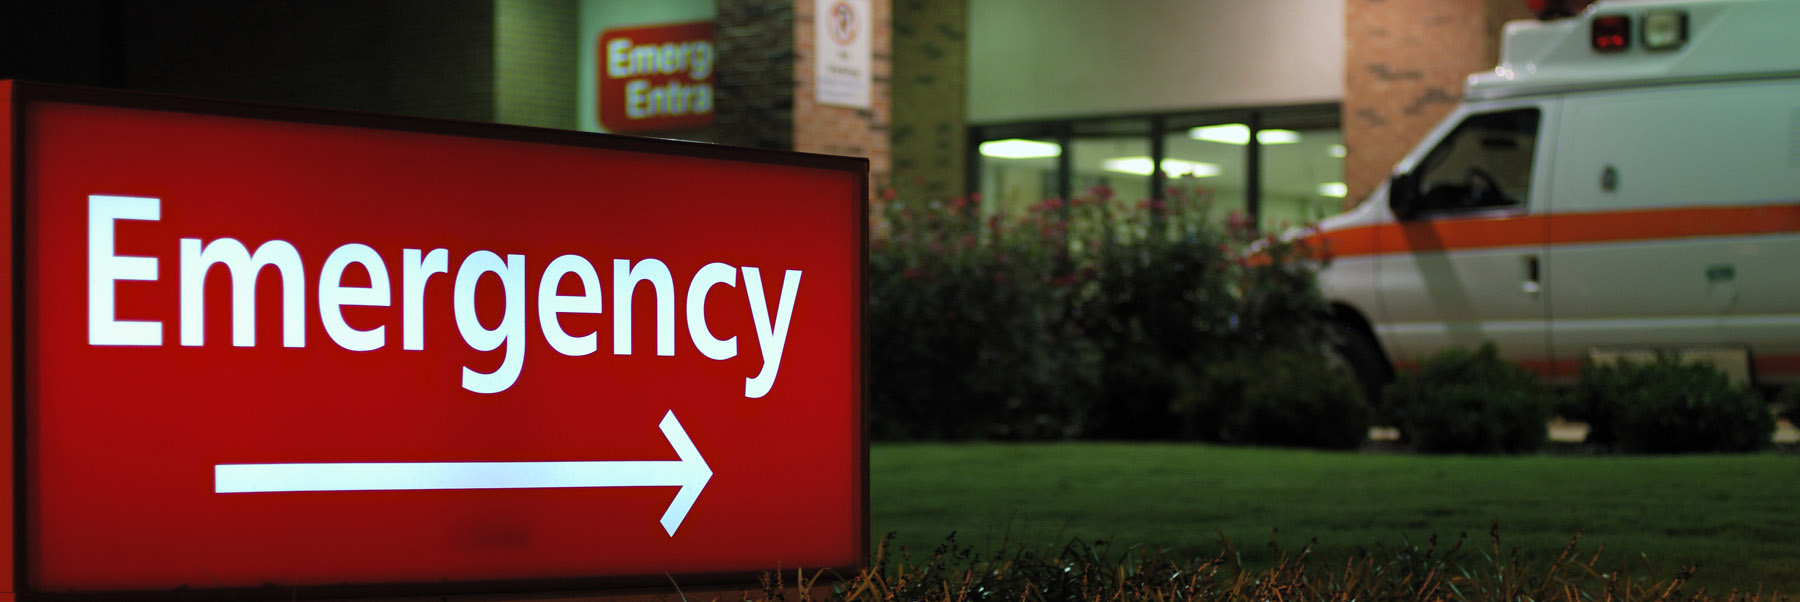 Emergency sign points to a hospital entrance